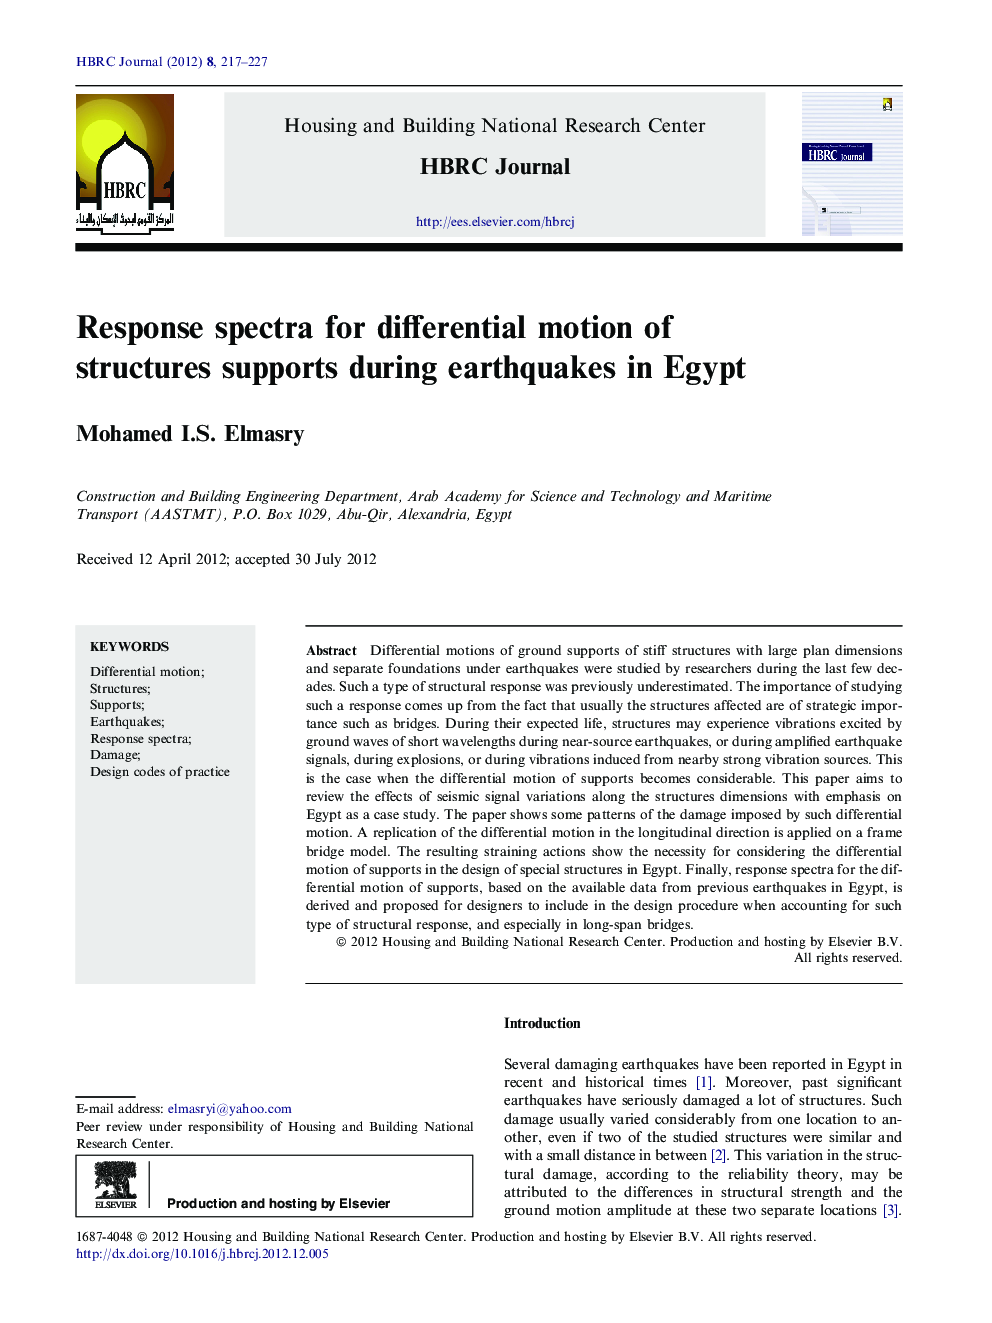 Response spectra for differential motion of structures supports during earthquakes in Egypt 